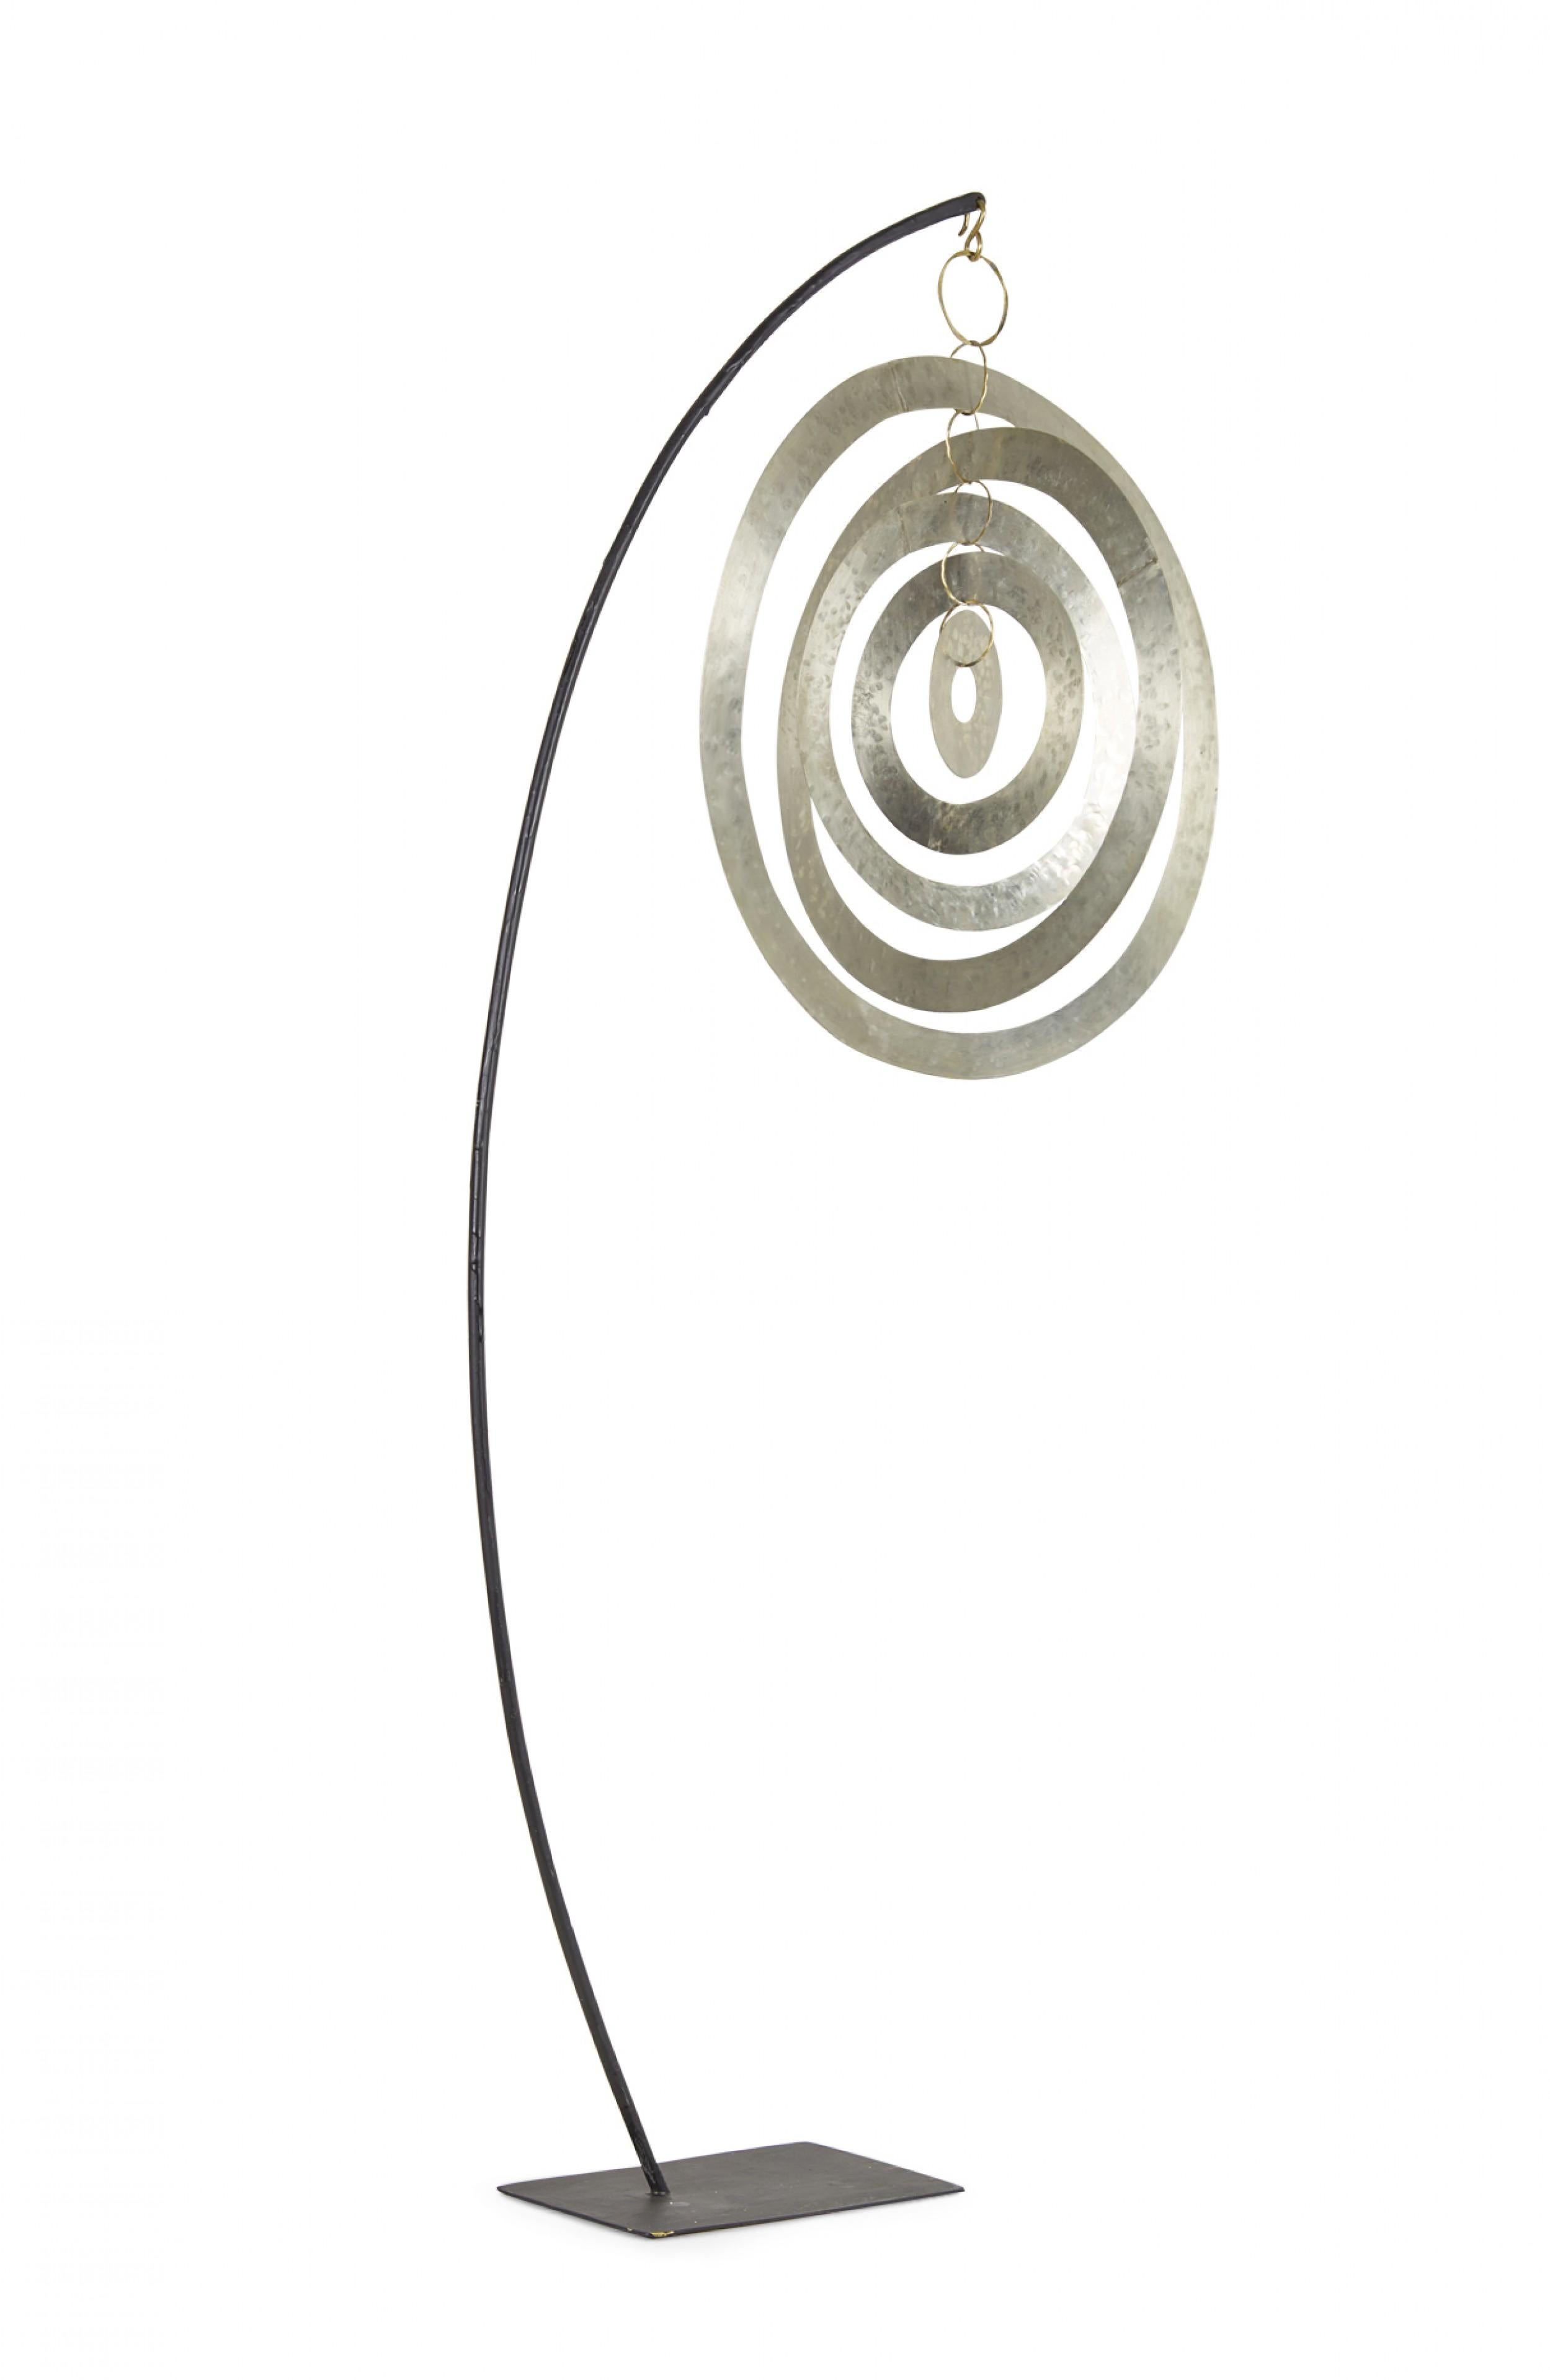 Contemporary Abstract Hammered Nickel Orbital Sculpture Suspended on a Metal Mou For Sale 1